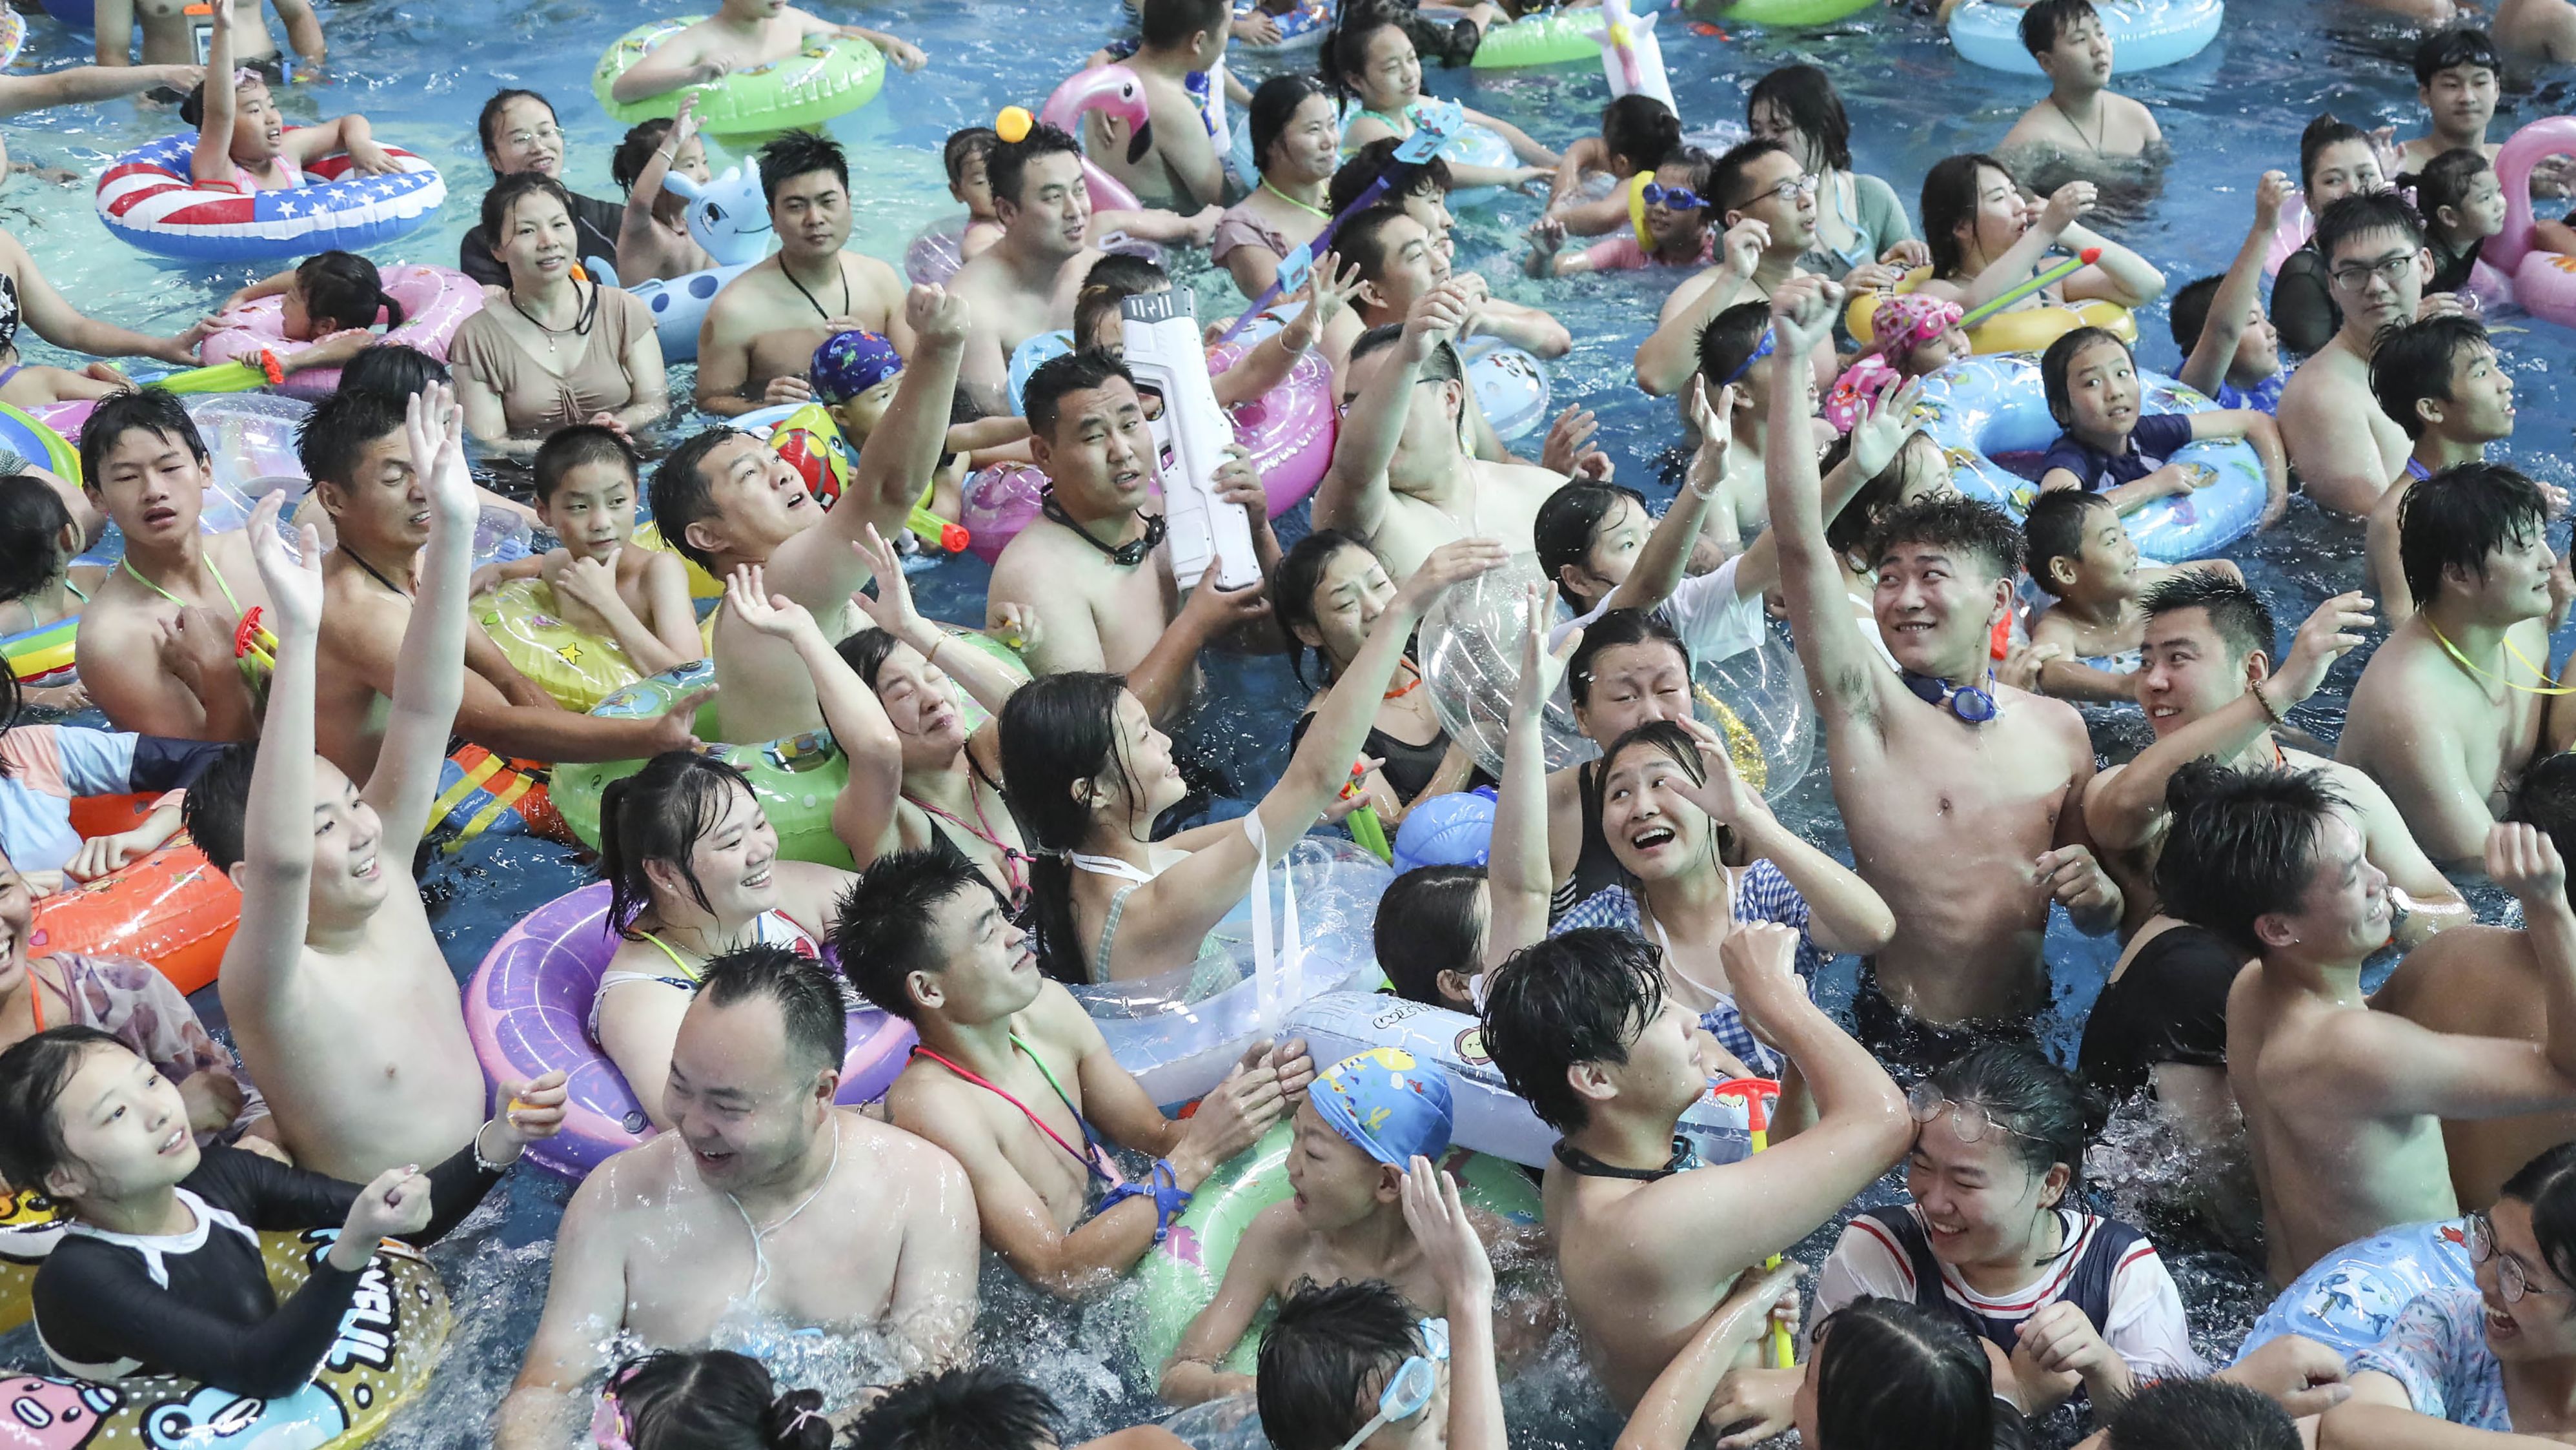 People cool off in a pool at a water park in Huaian, in China's eastern Jiangsu province, July 18.